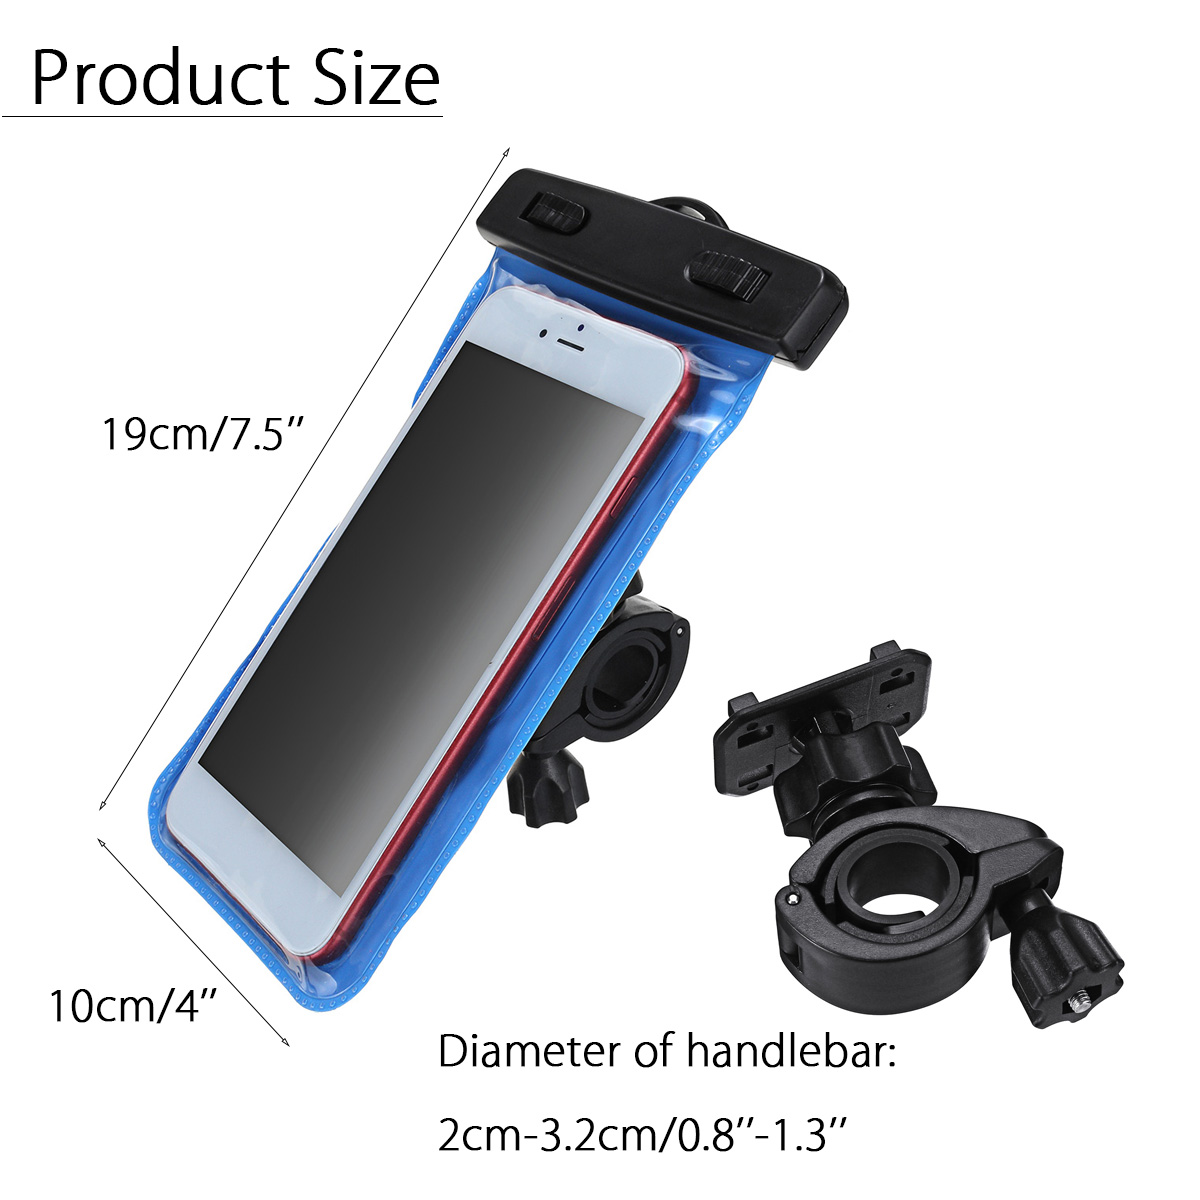 Universal-2-in-1-Bicycle-Handlebar-Holder-Storage-Pouch-Waterproof-Bag-for-Xiaomi-Mobile-Phone-1330663